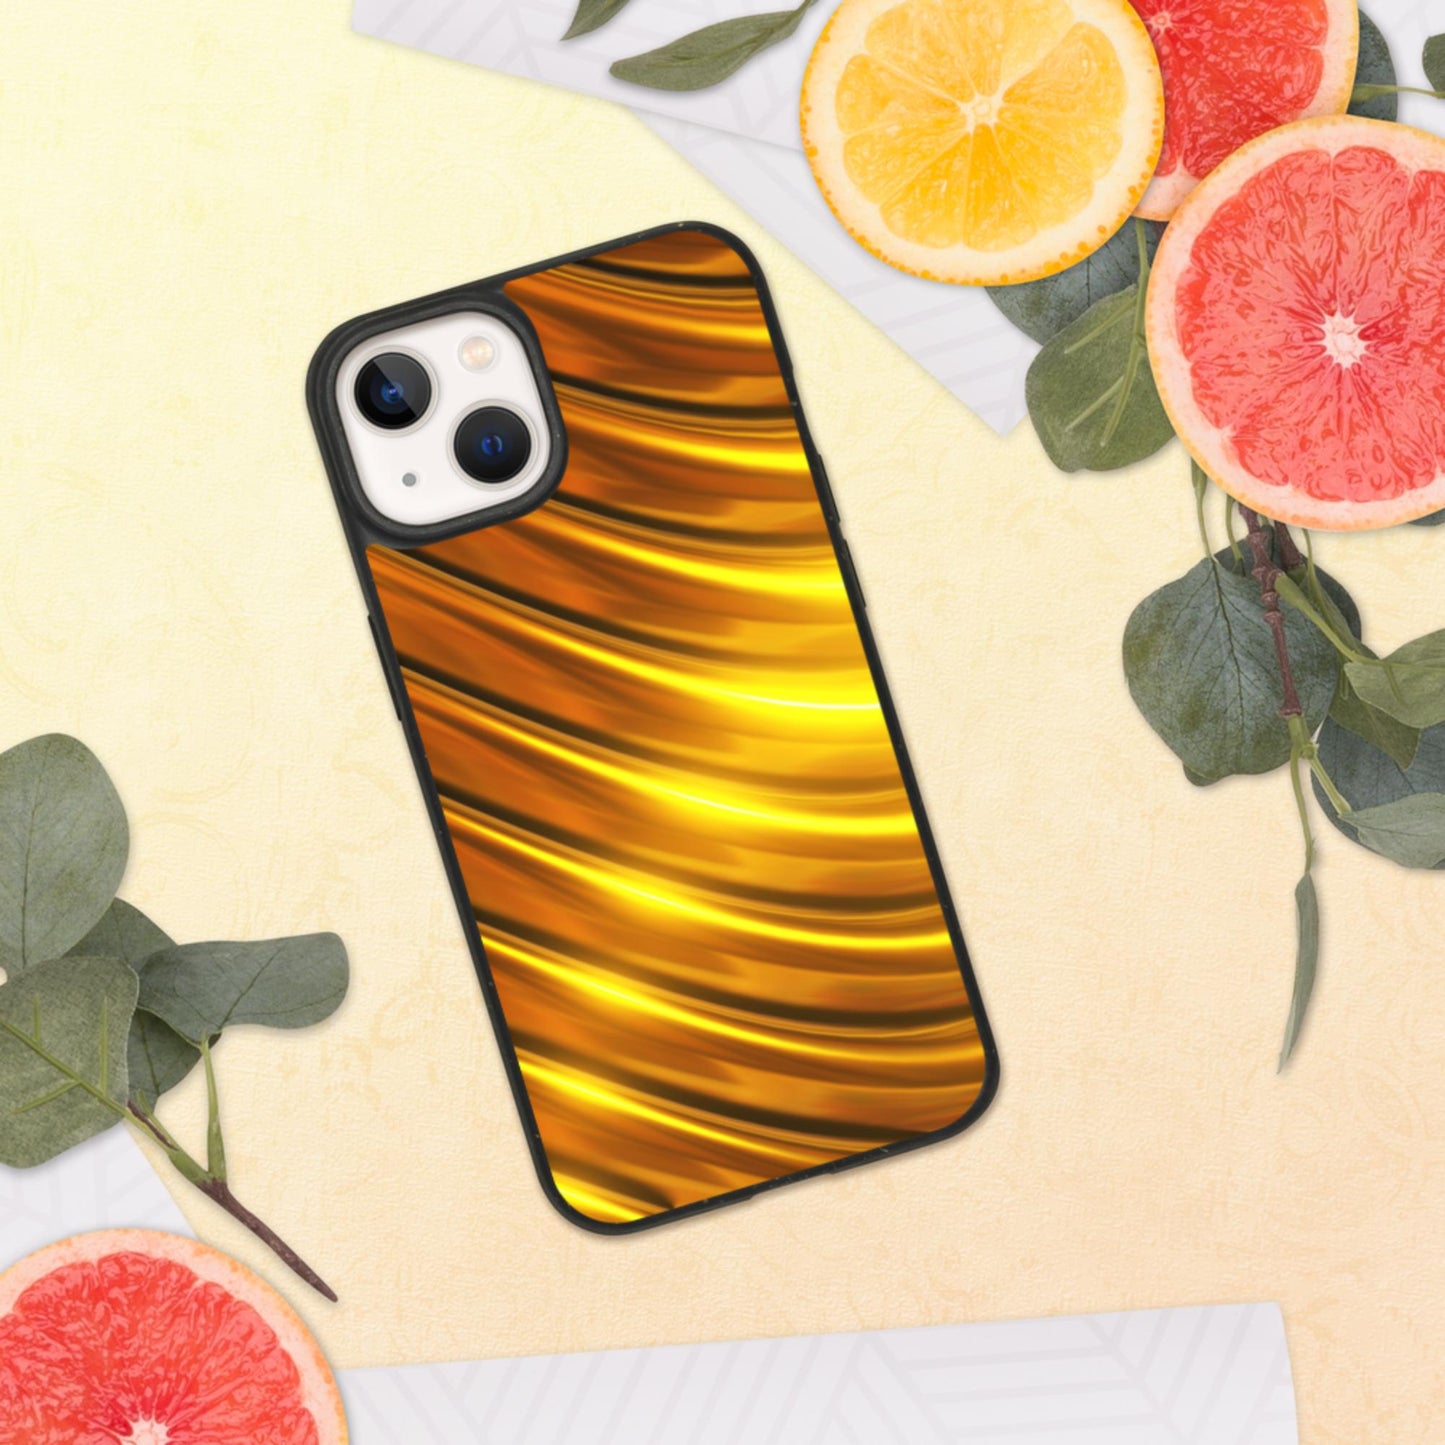 Biodegradable iPhone Case With Classy Design